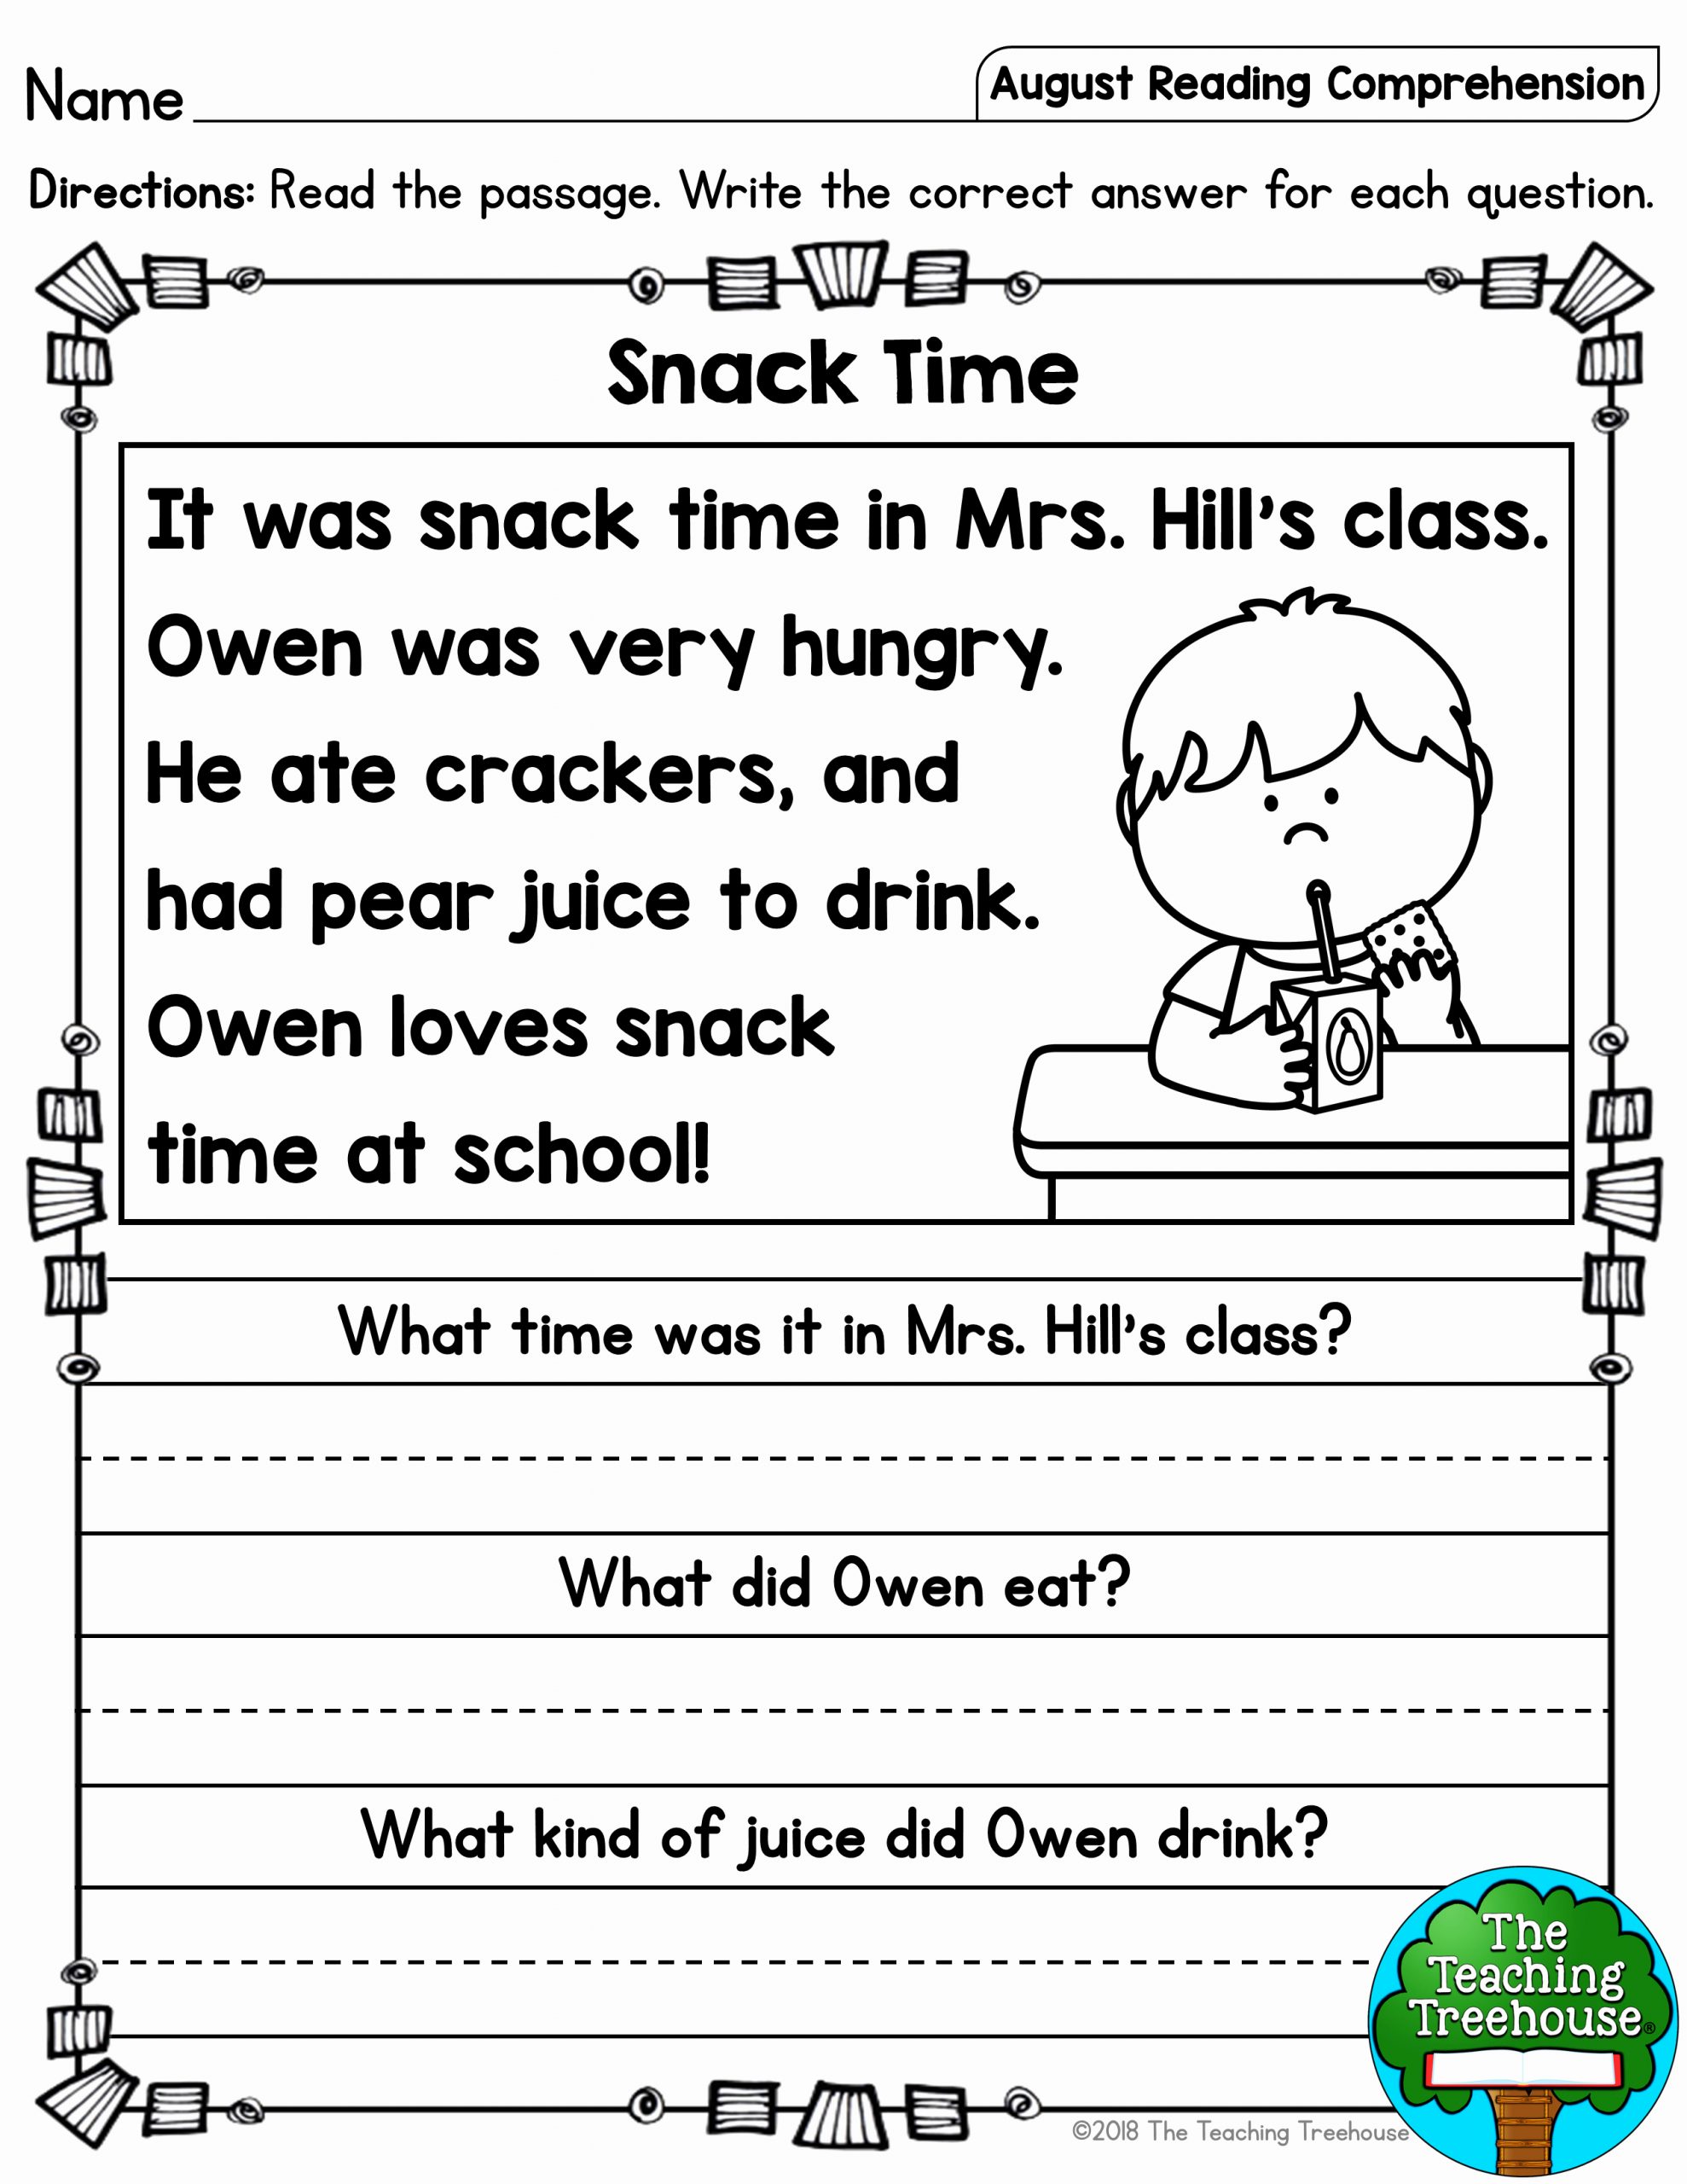 Preschool Reading Comprehension Worksheets Elegant This Free Reading Prehension Activity is Ideal for